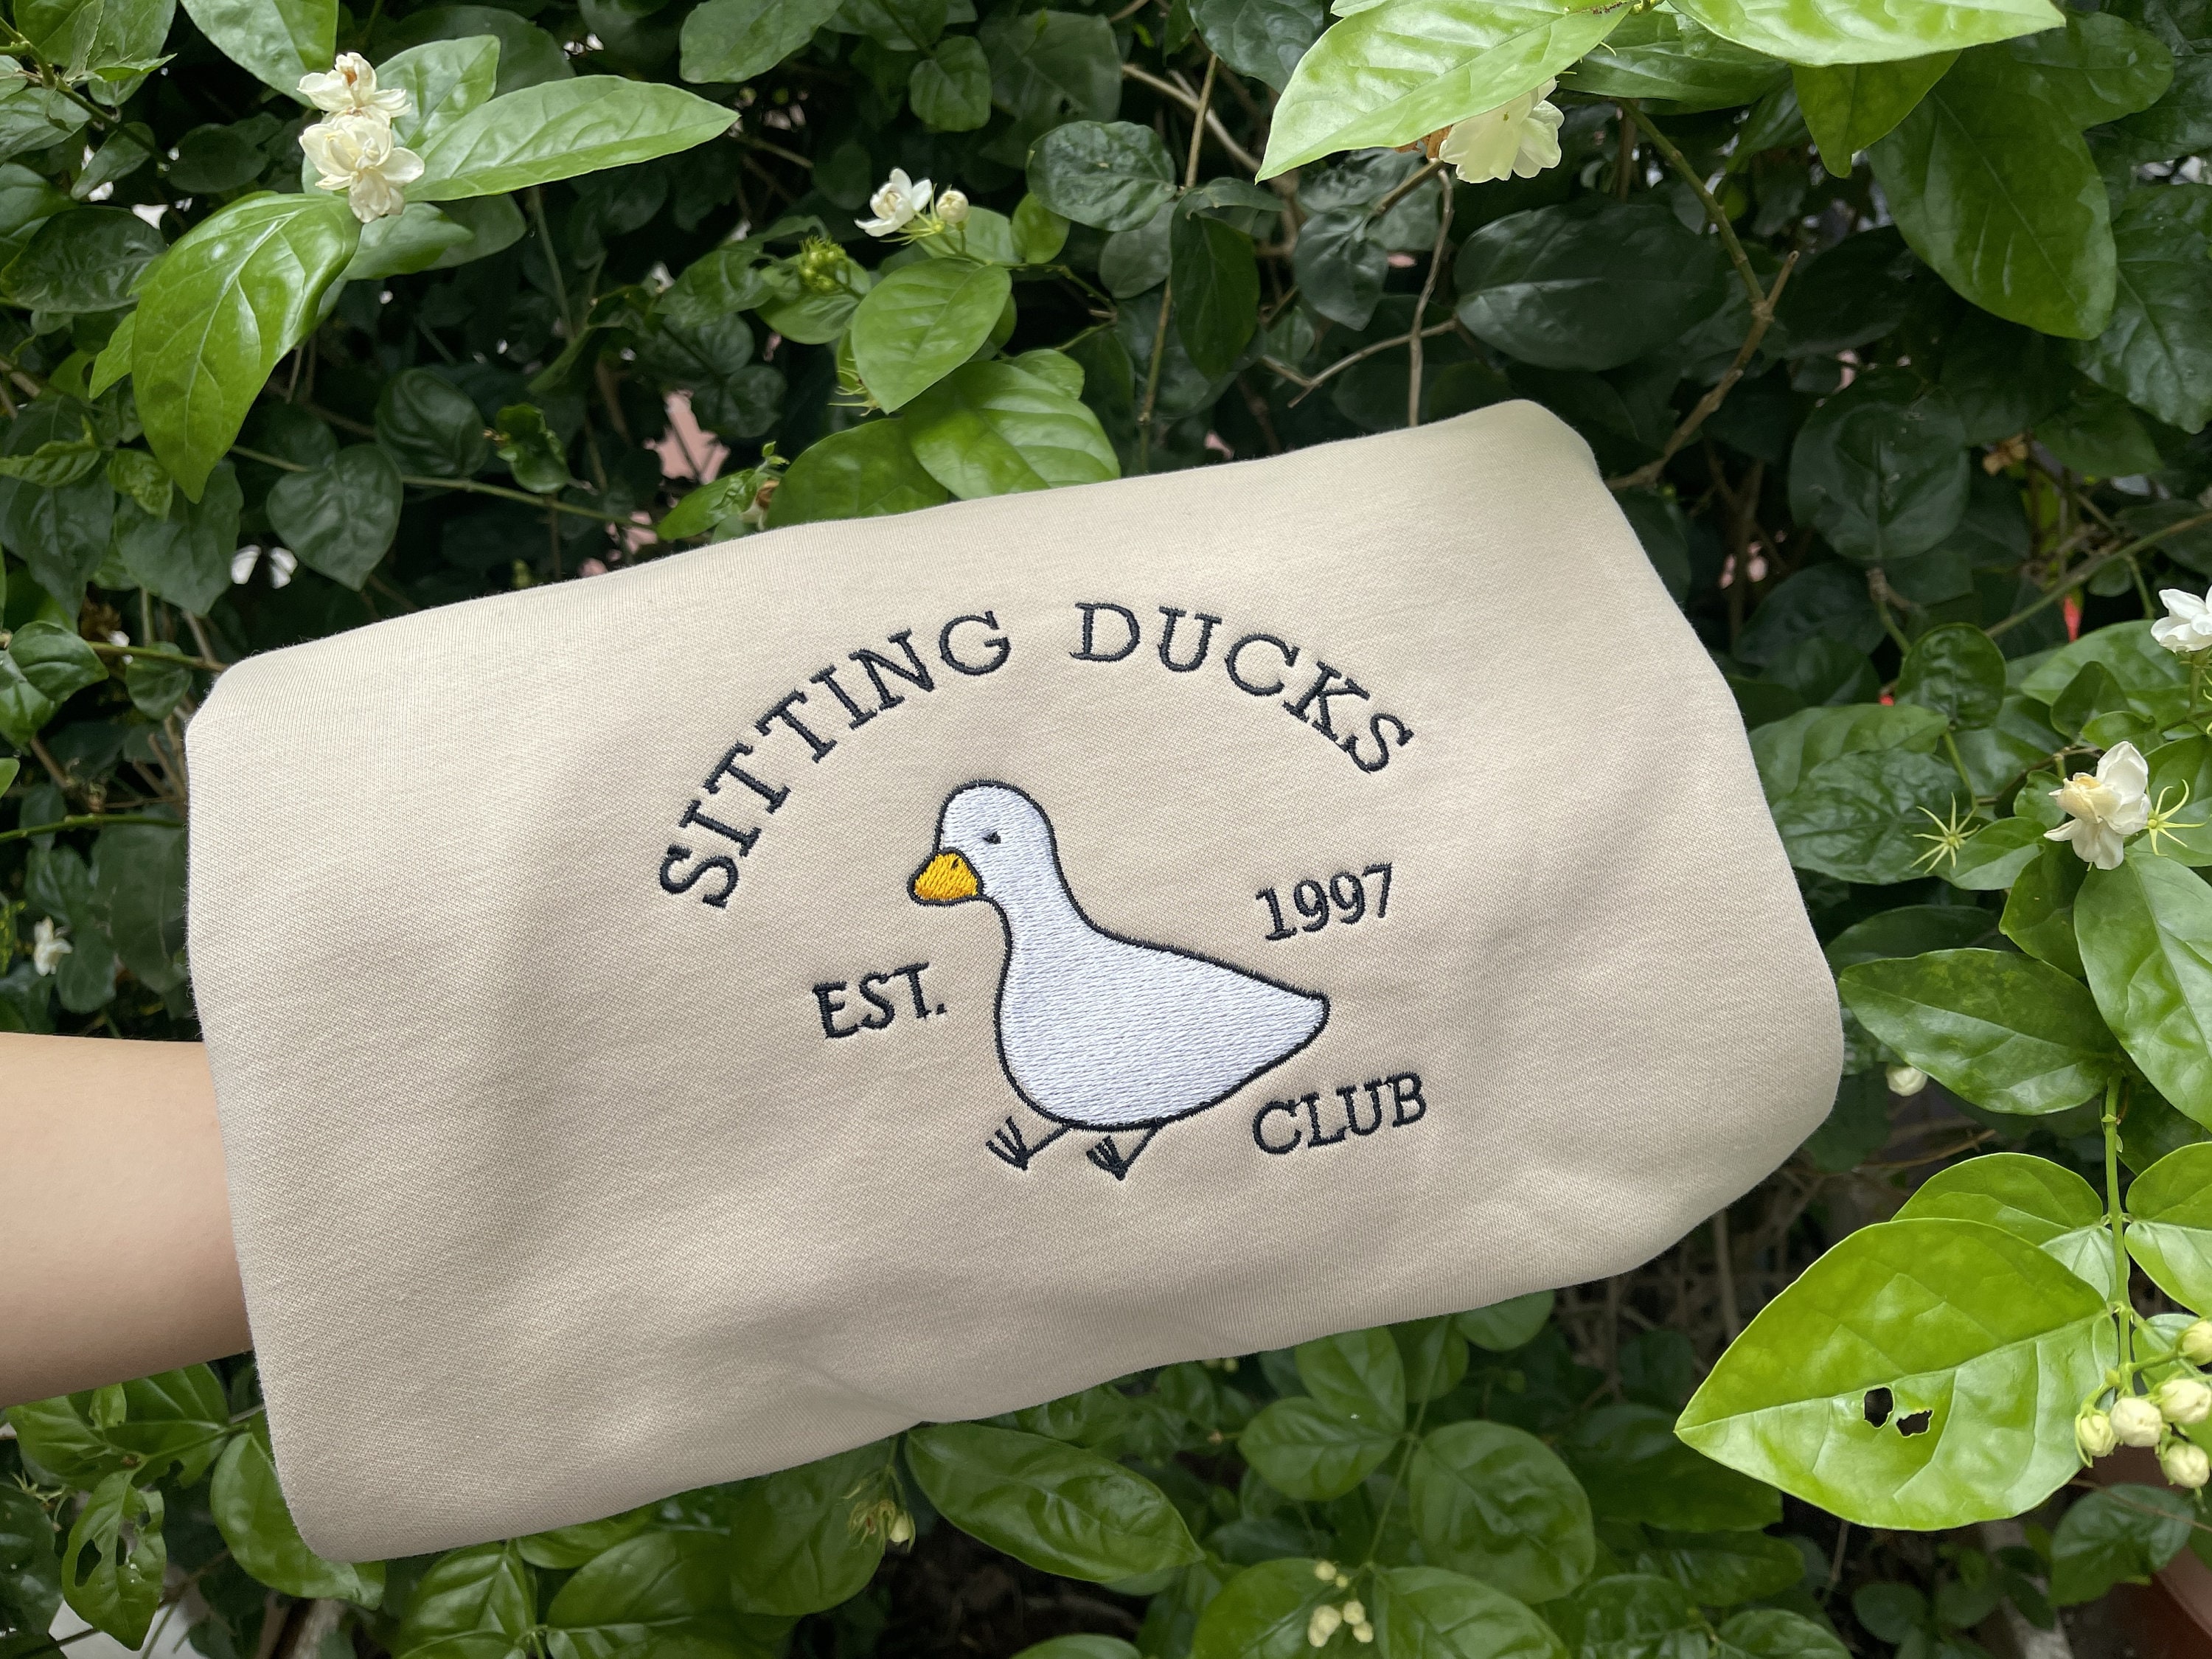 Discover Sitting Ducks Club Embroidered Sweatshirt, Duck Shirt, Funny Shirt, Silly Goose, Est Shirt EH052